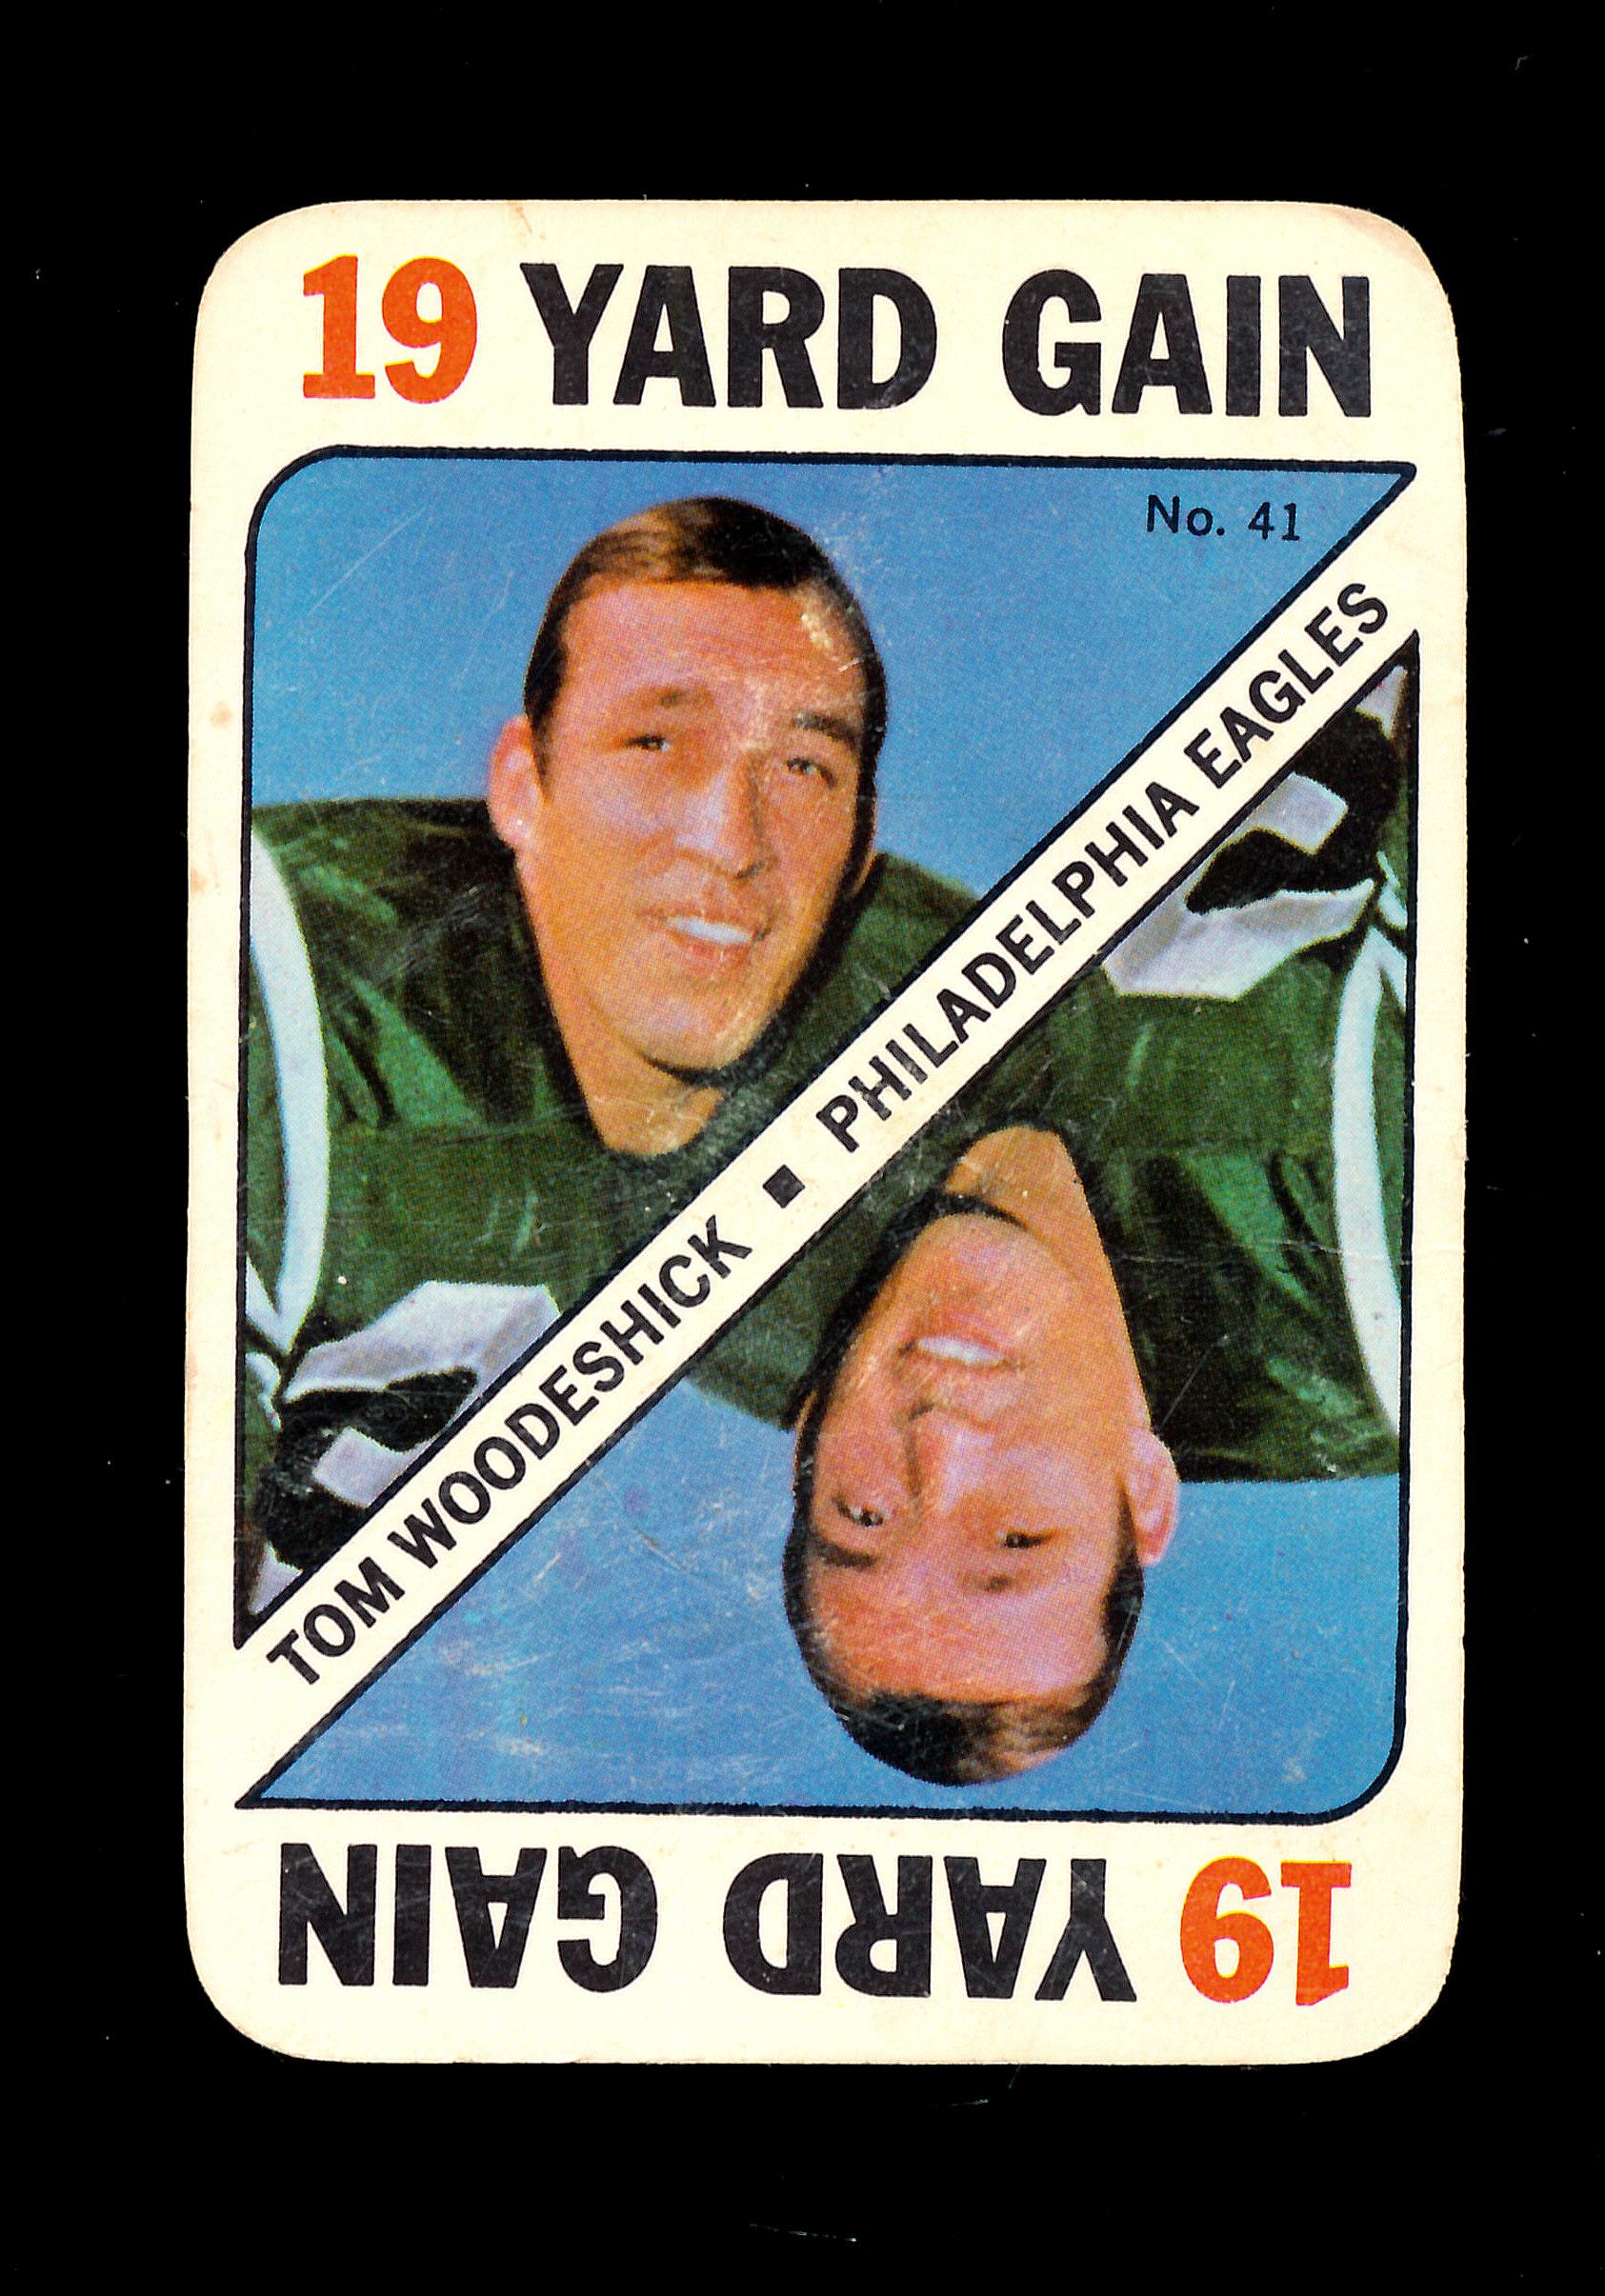 1971 Topps Game Card Tom Woodeshick Philadephia Eagles. EX/MT Condition